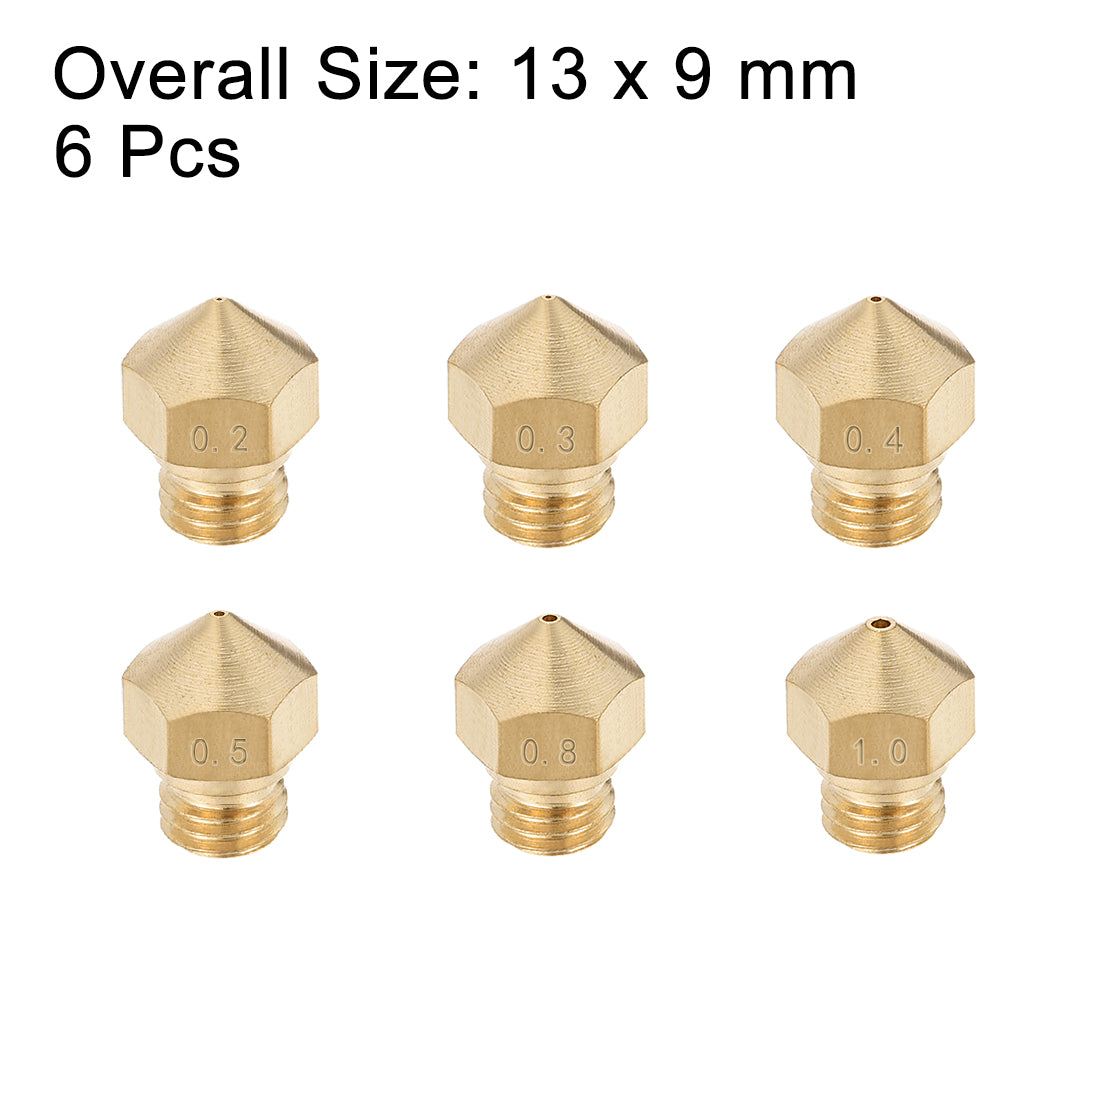 uxcell Uxcell 3D Printer Nozzle Fit for MK10, for 1.75mm Filament Brass,0.2mm - 1mm Total 6pcs